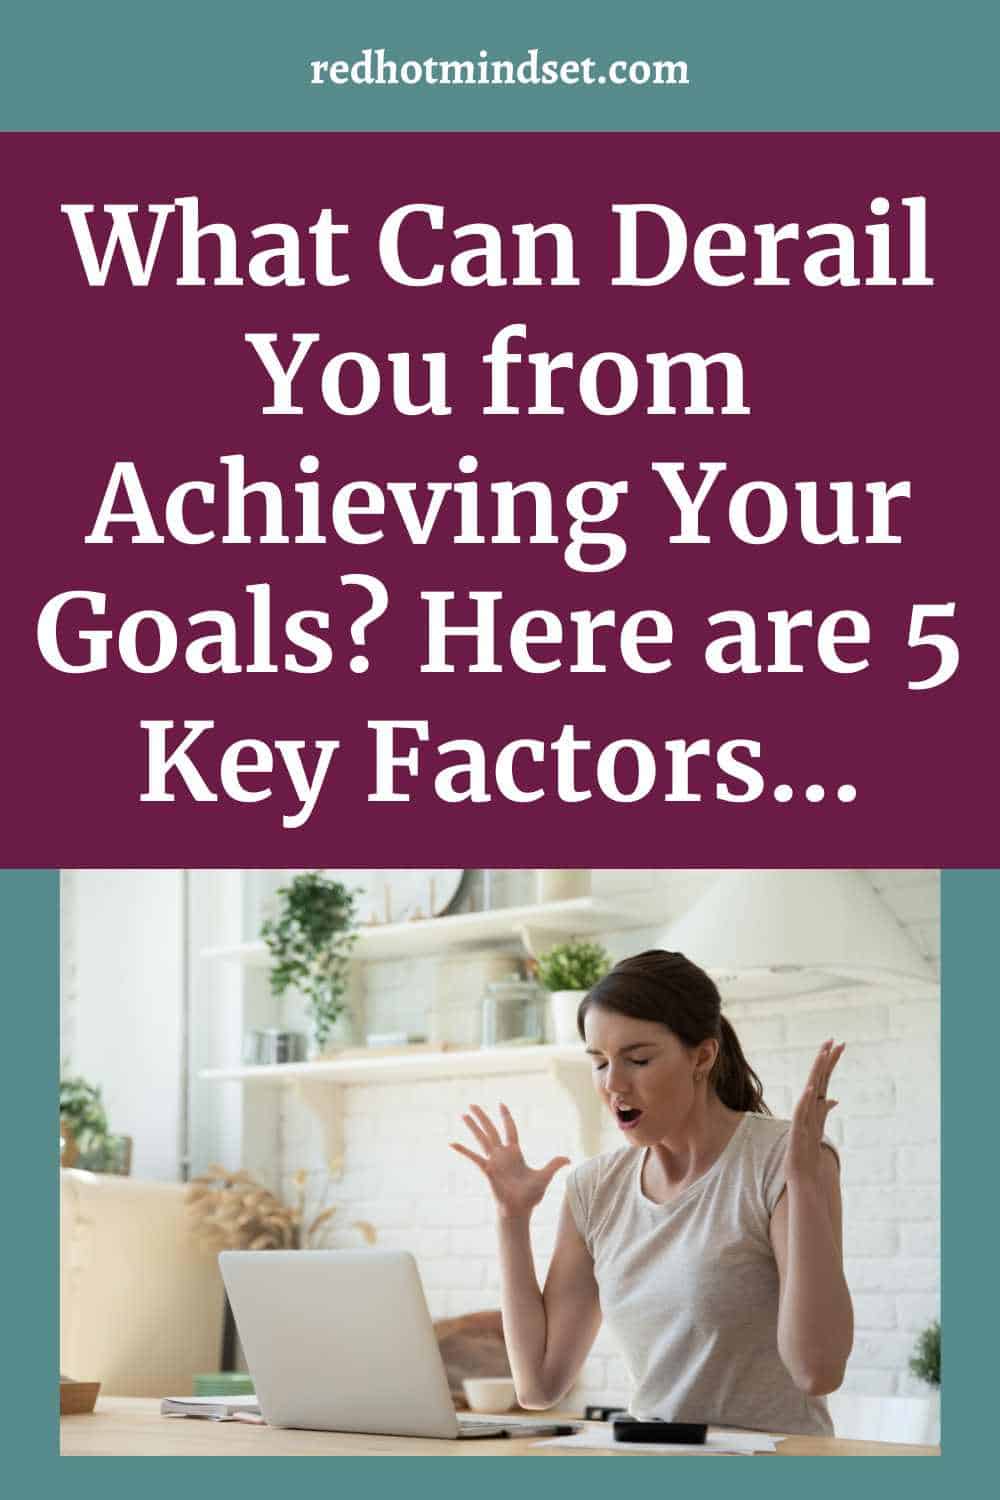 Ep 177 | What Can Derail You from Achieving Your Goals? Here are 5 Key Factors with Gillian Perkins